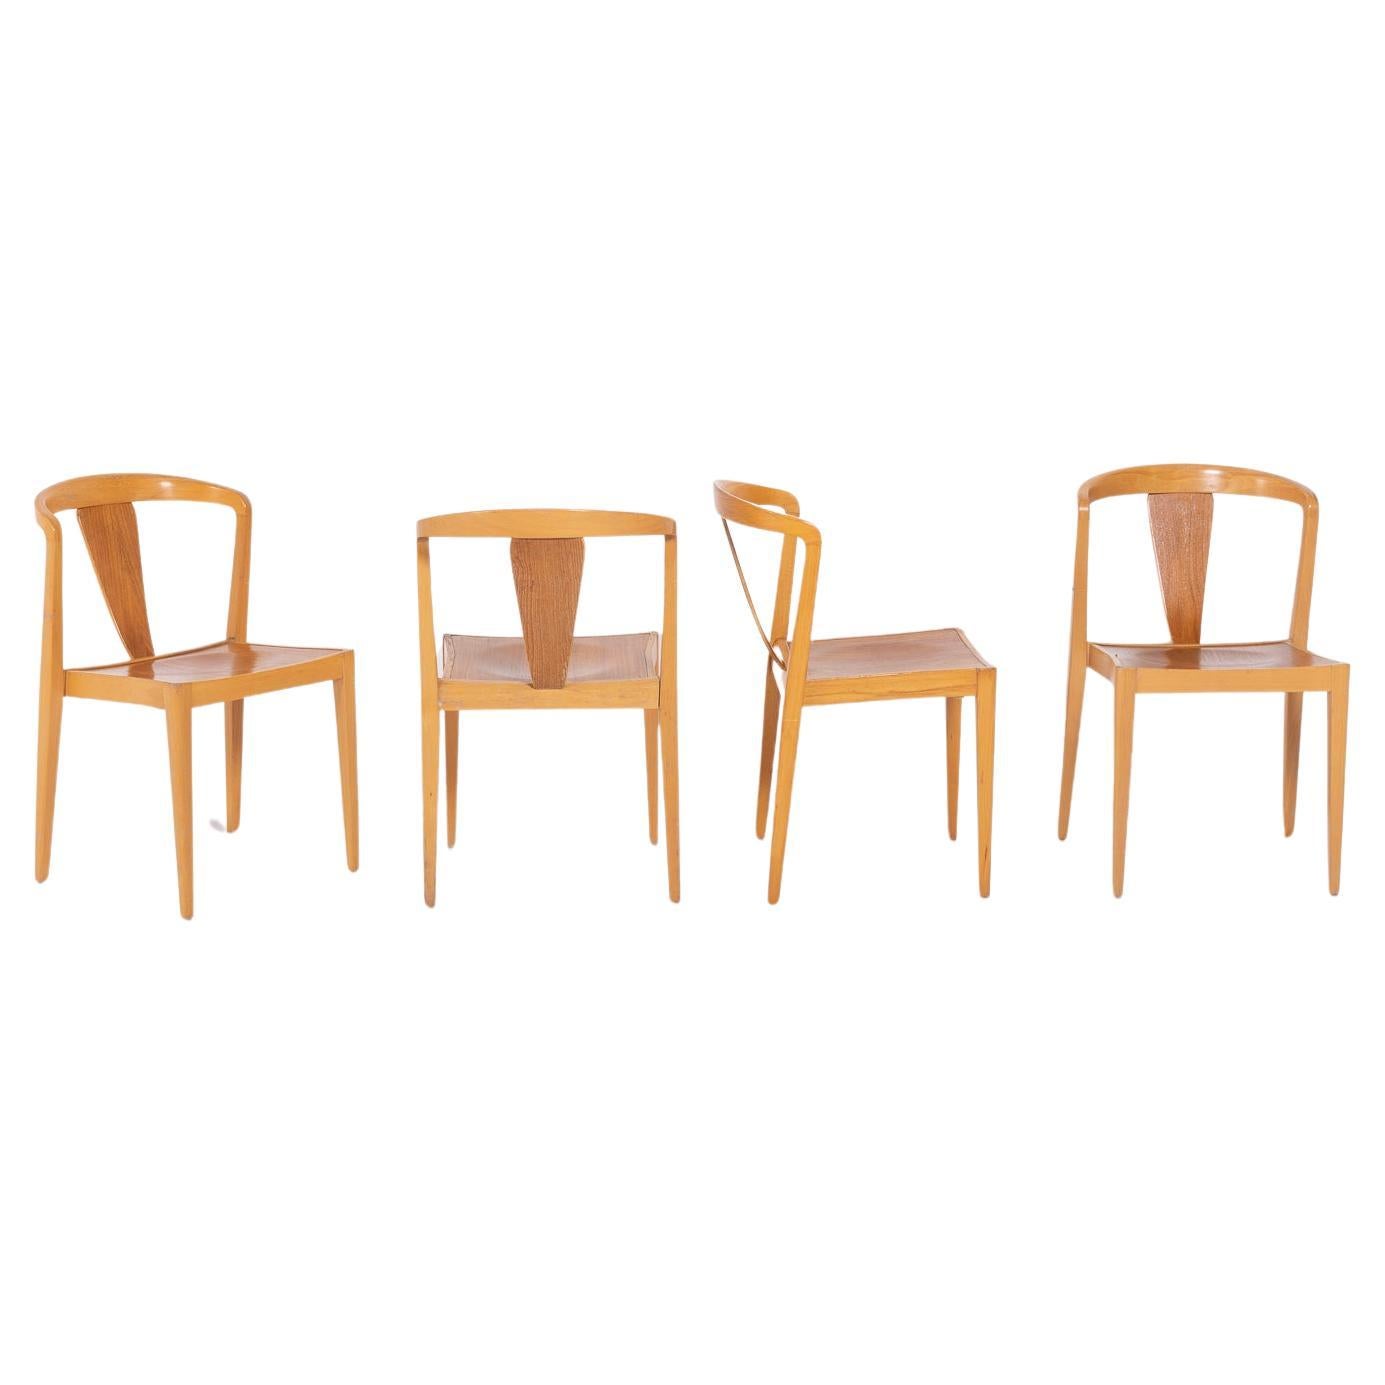 Set of 4 chairs from 1960’s by Axel Larsson for Bodafors